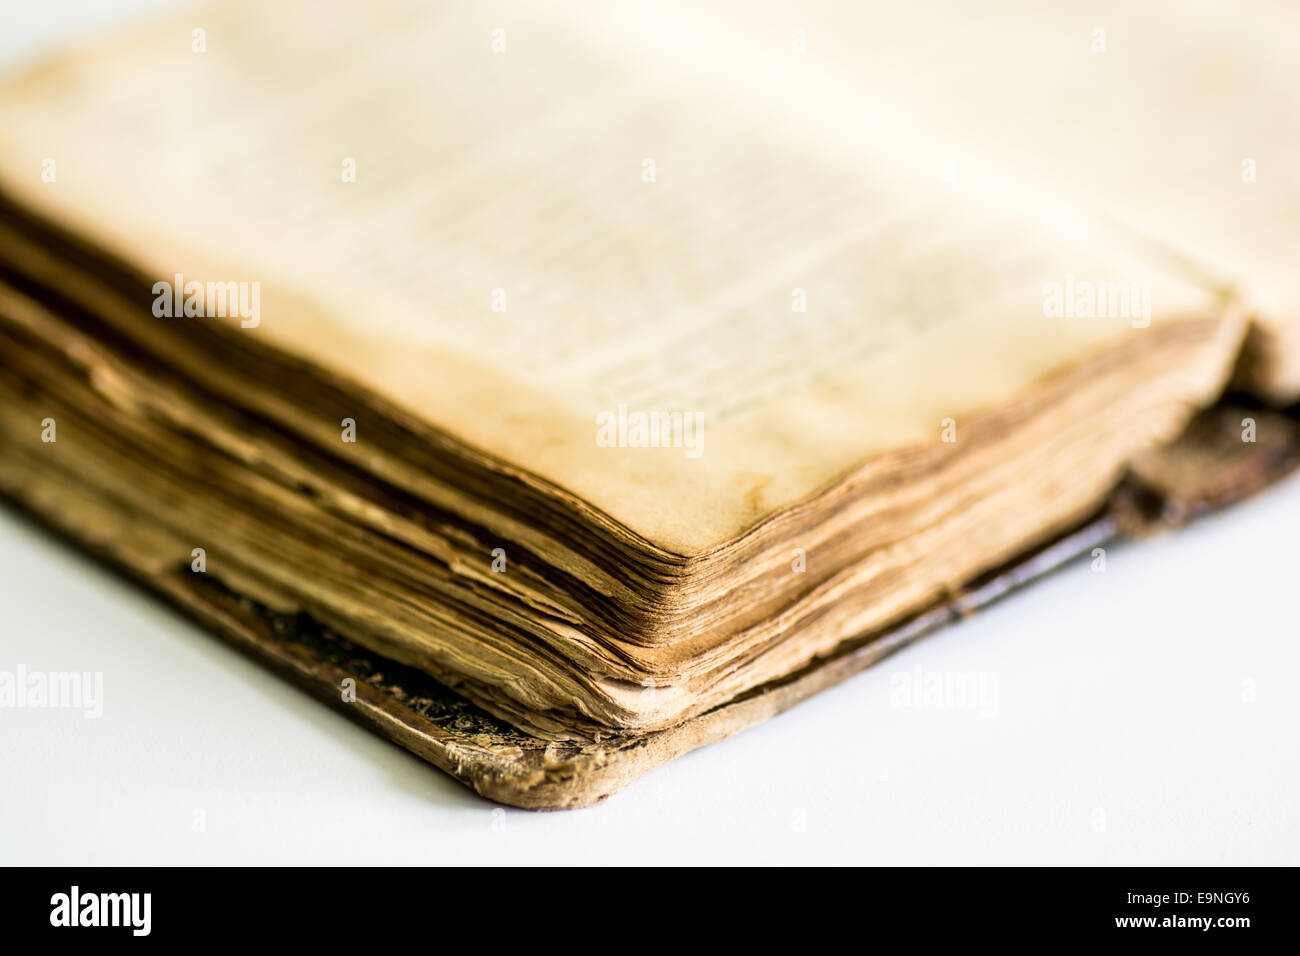 Antique Leather Book Cover Stock Photo, Picture and Royalty Free Image.  Image 16271921.